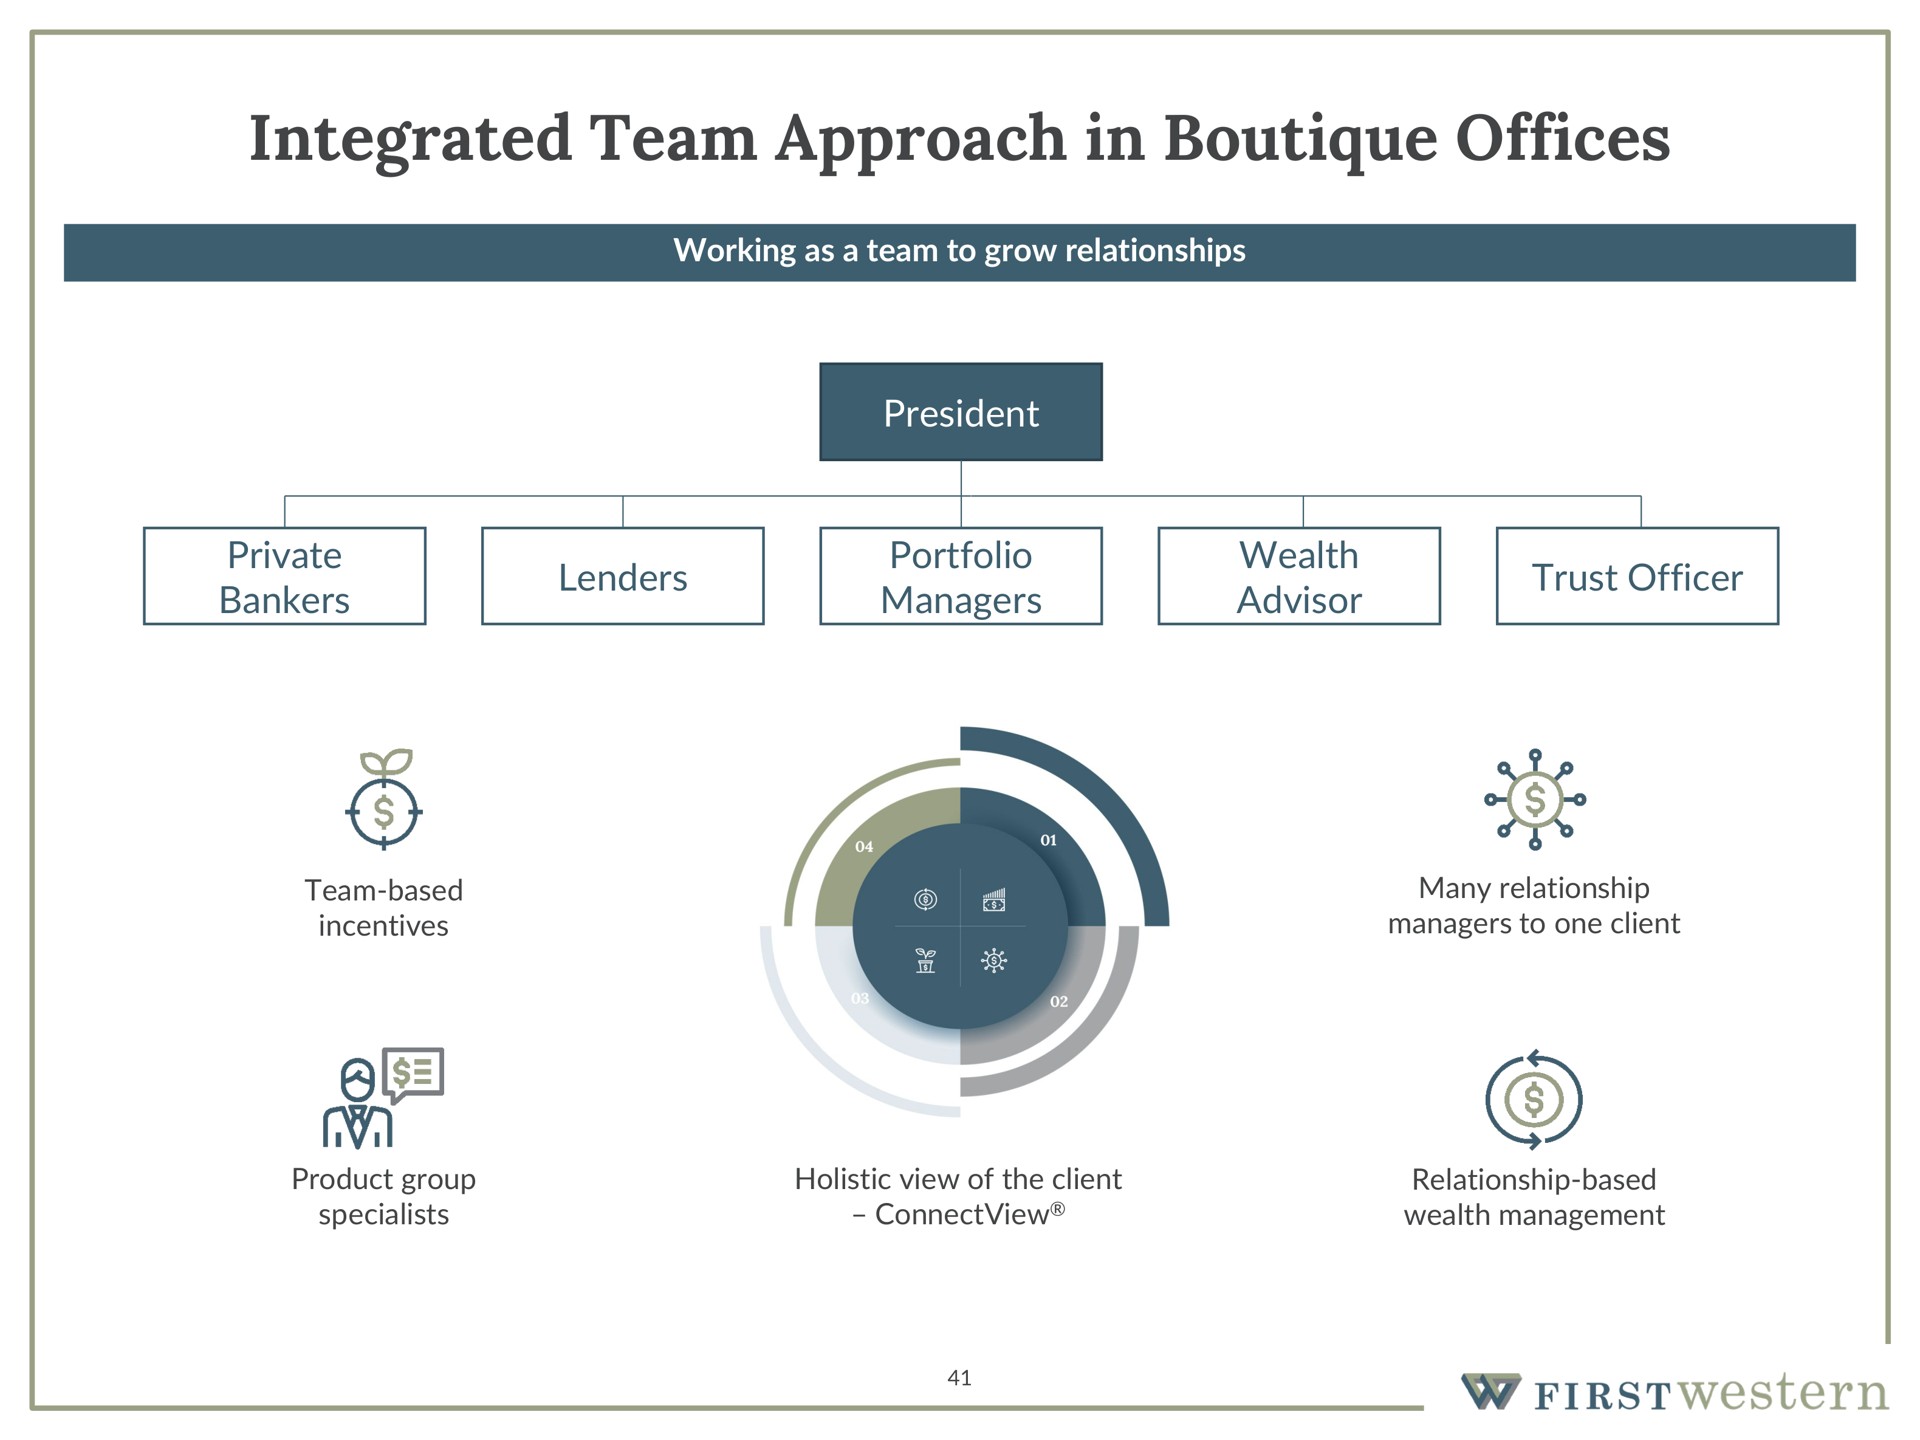 integrated team approach in offices | First Western Financial